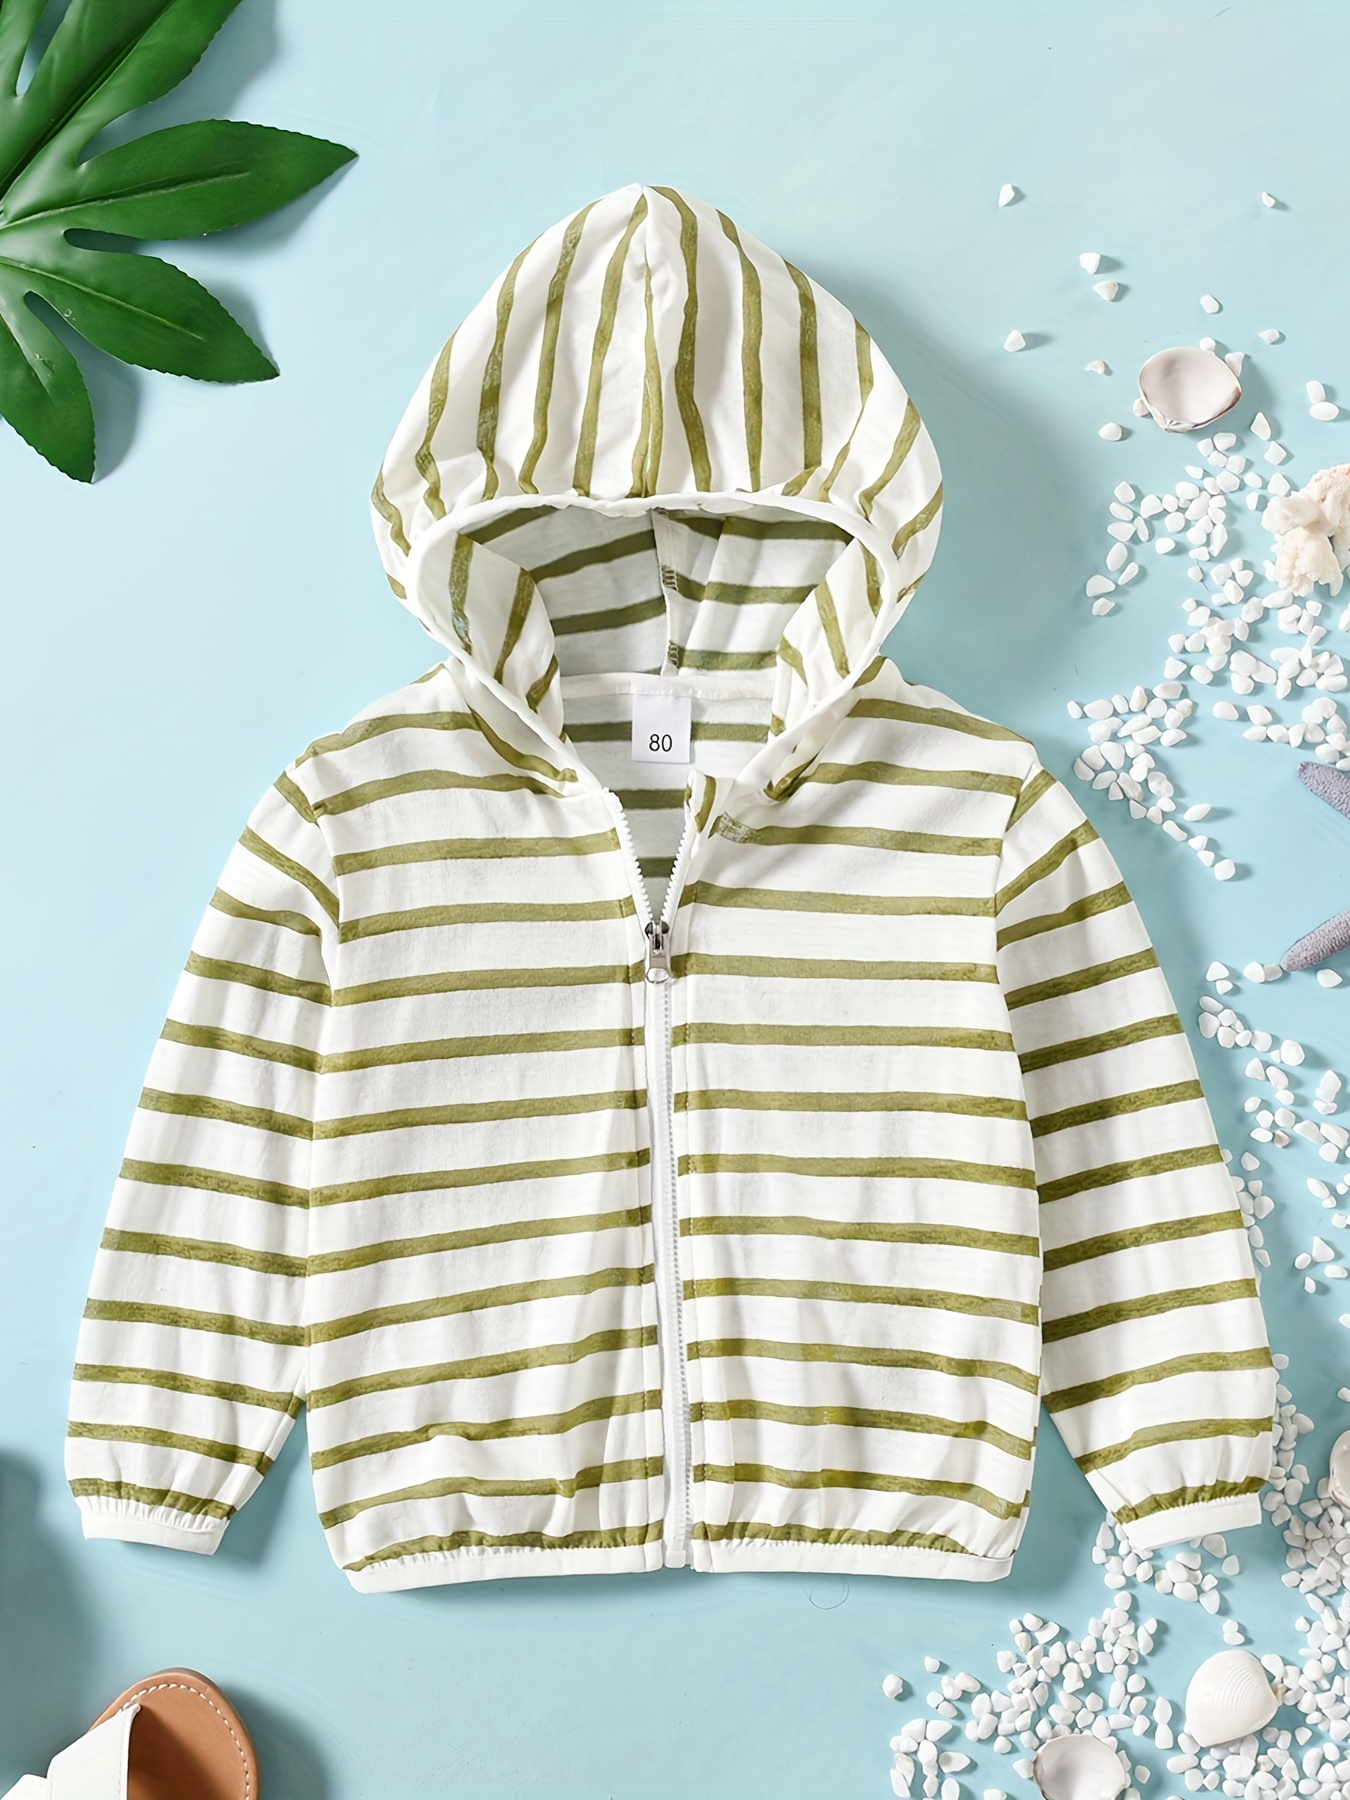 Boys Striped Zip Up Long Sleeves Hooded Jacket, Summer Sunscreen Clothing  For Vacation Beach Travel